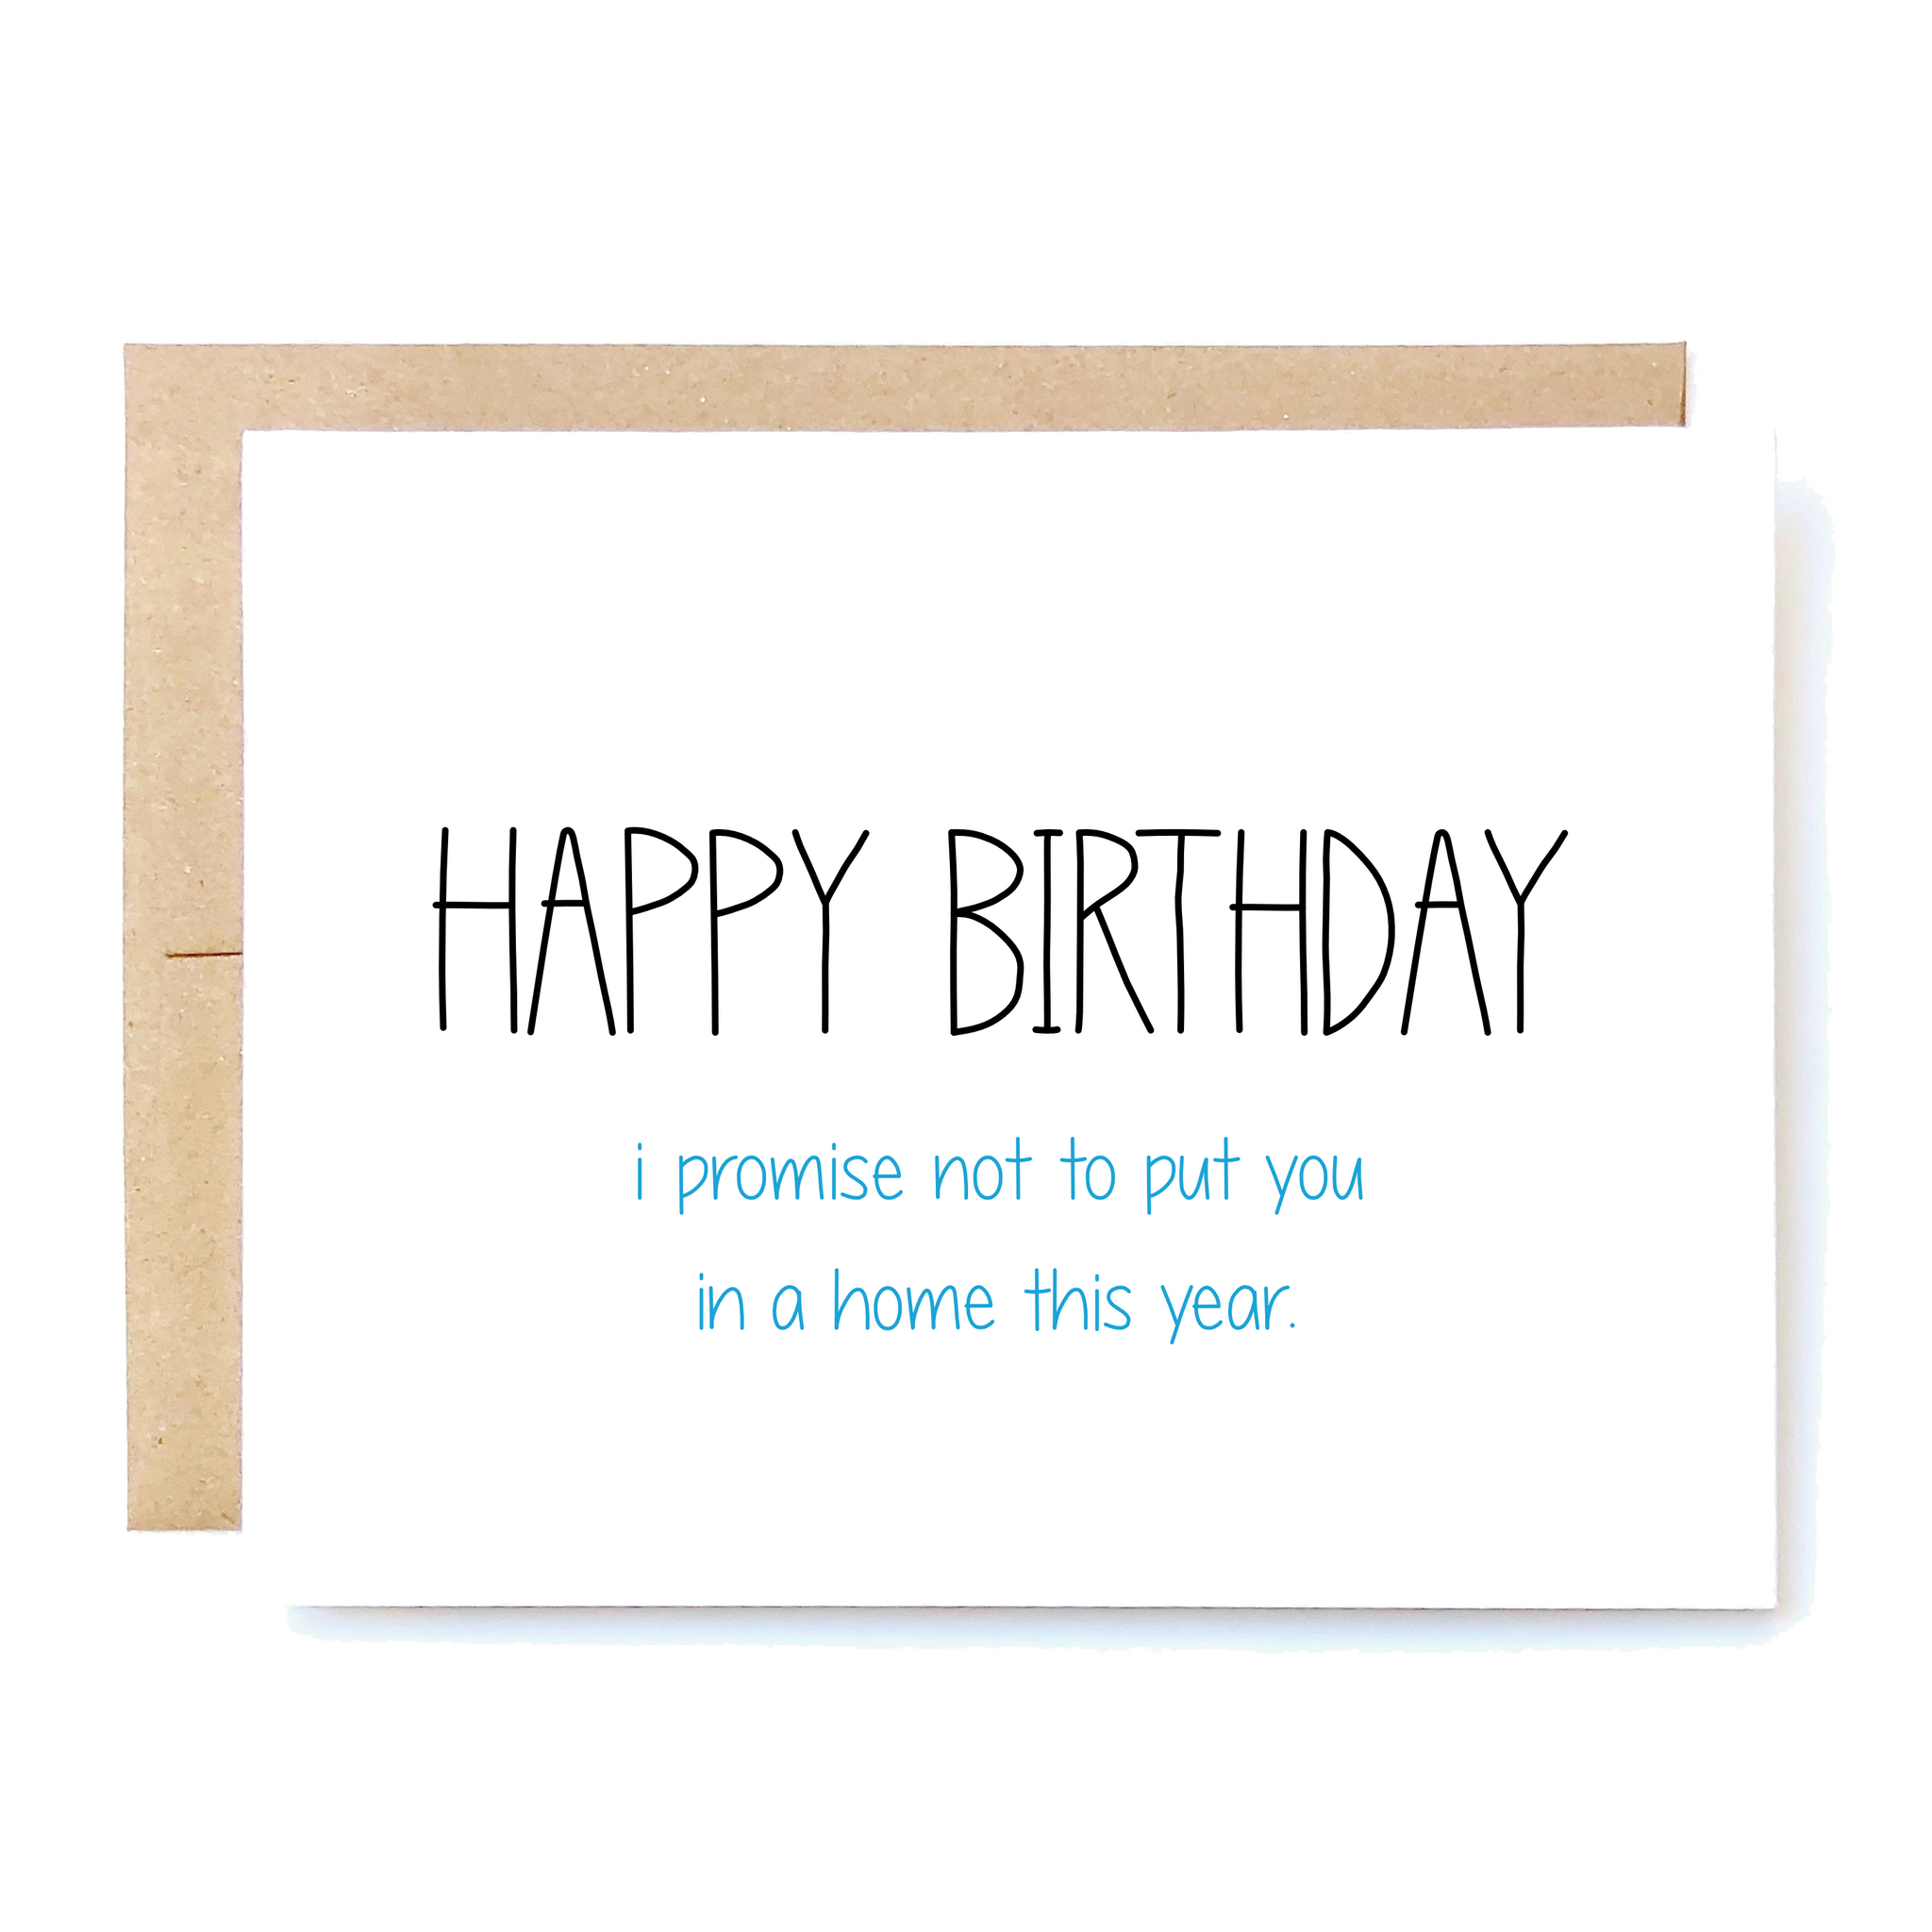 Card Front: Happy Birthday. I promise not to put you in a home this year. 